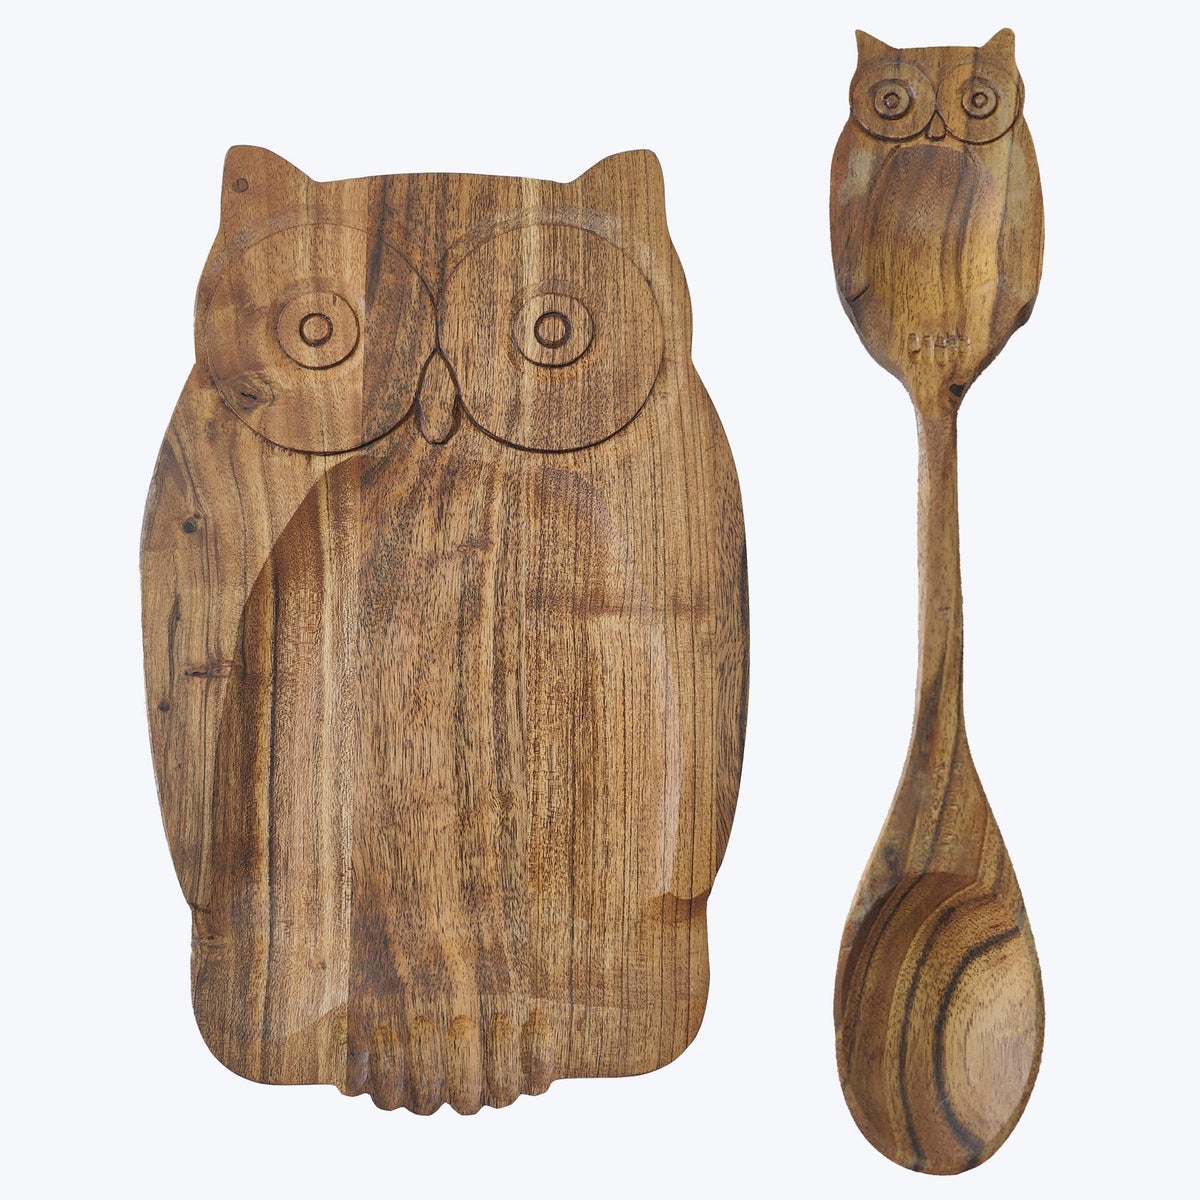 Acacia Wood Owl Spoon Rest with Spoon